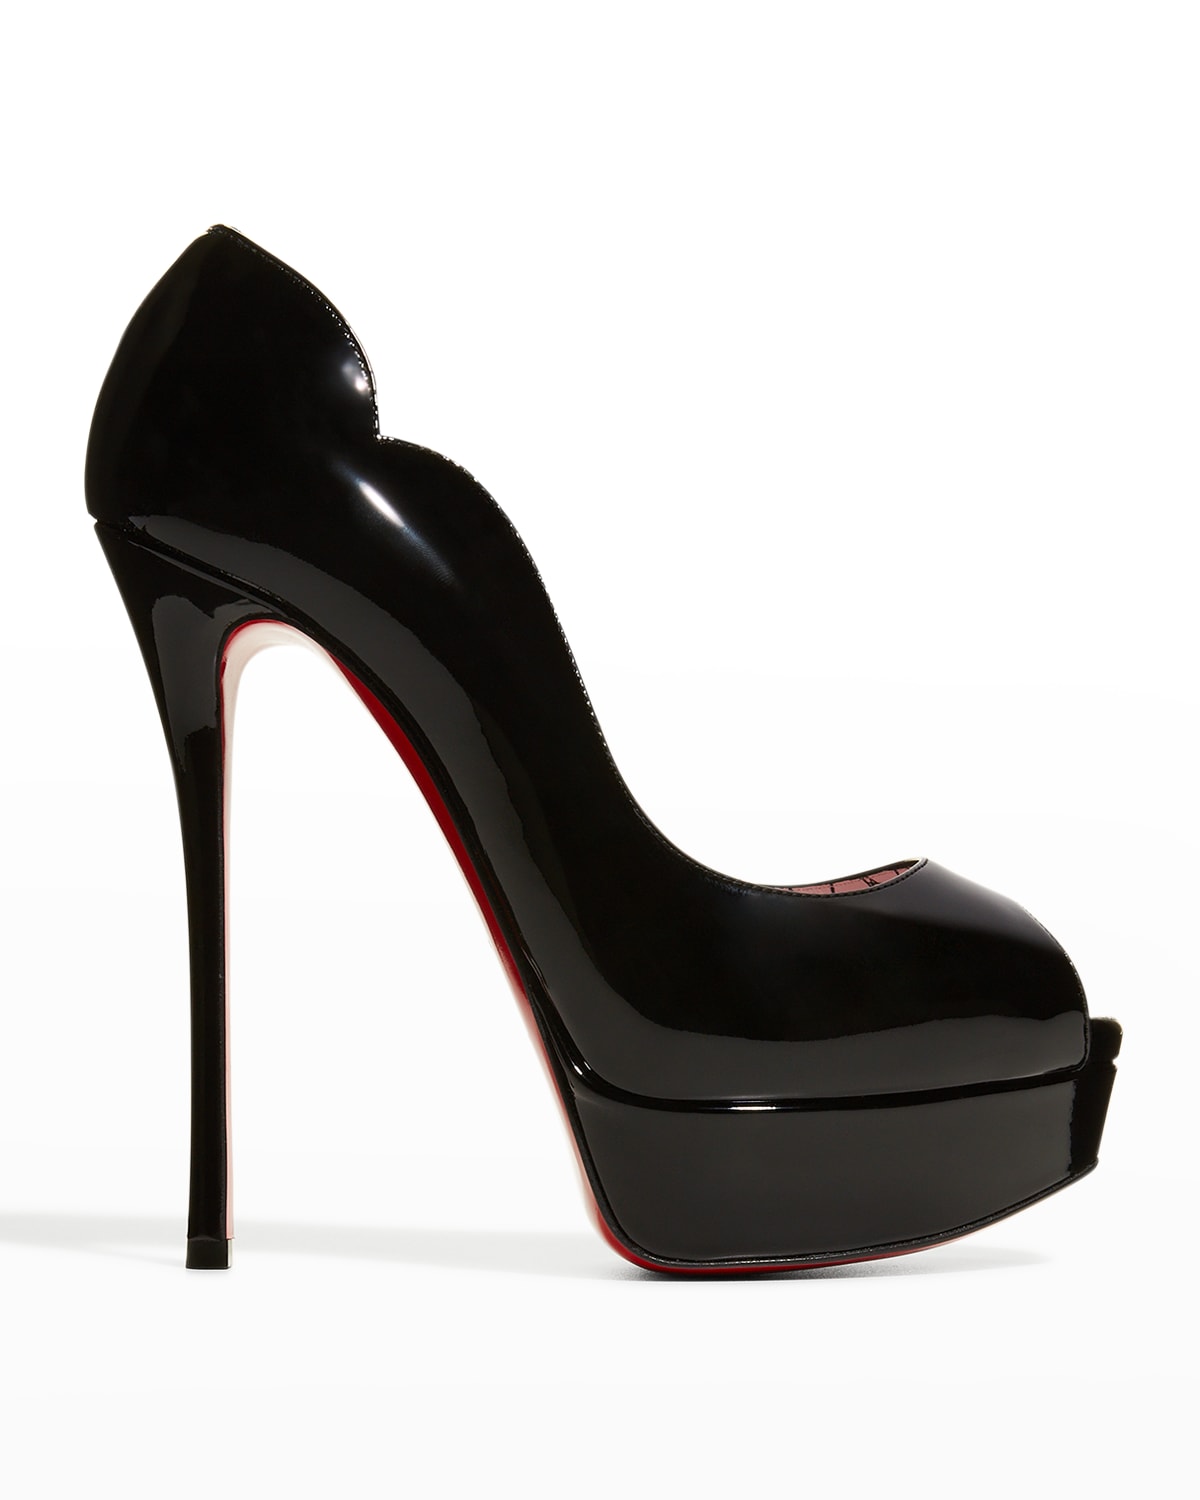 Christian Louboutin Chick Up Alta Patent Red Sole Pumps